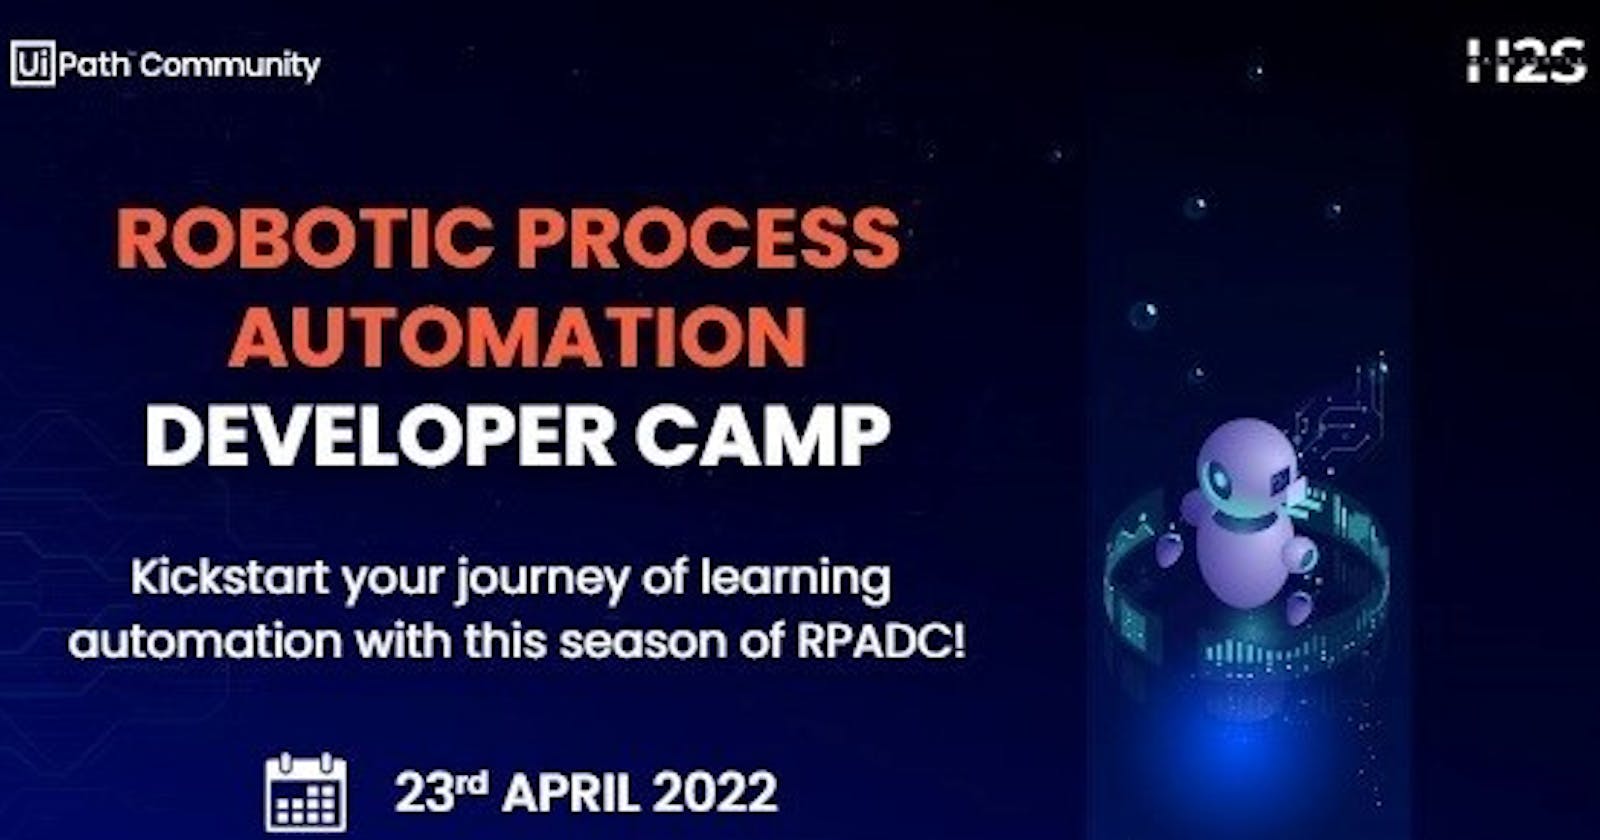 RPA Developer Camp
-By UI PATH COMMUNITY and HACK2SKILL